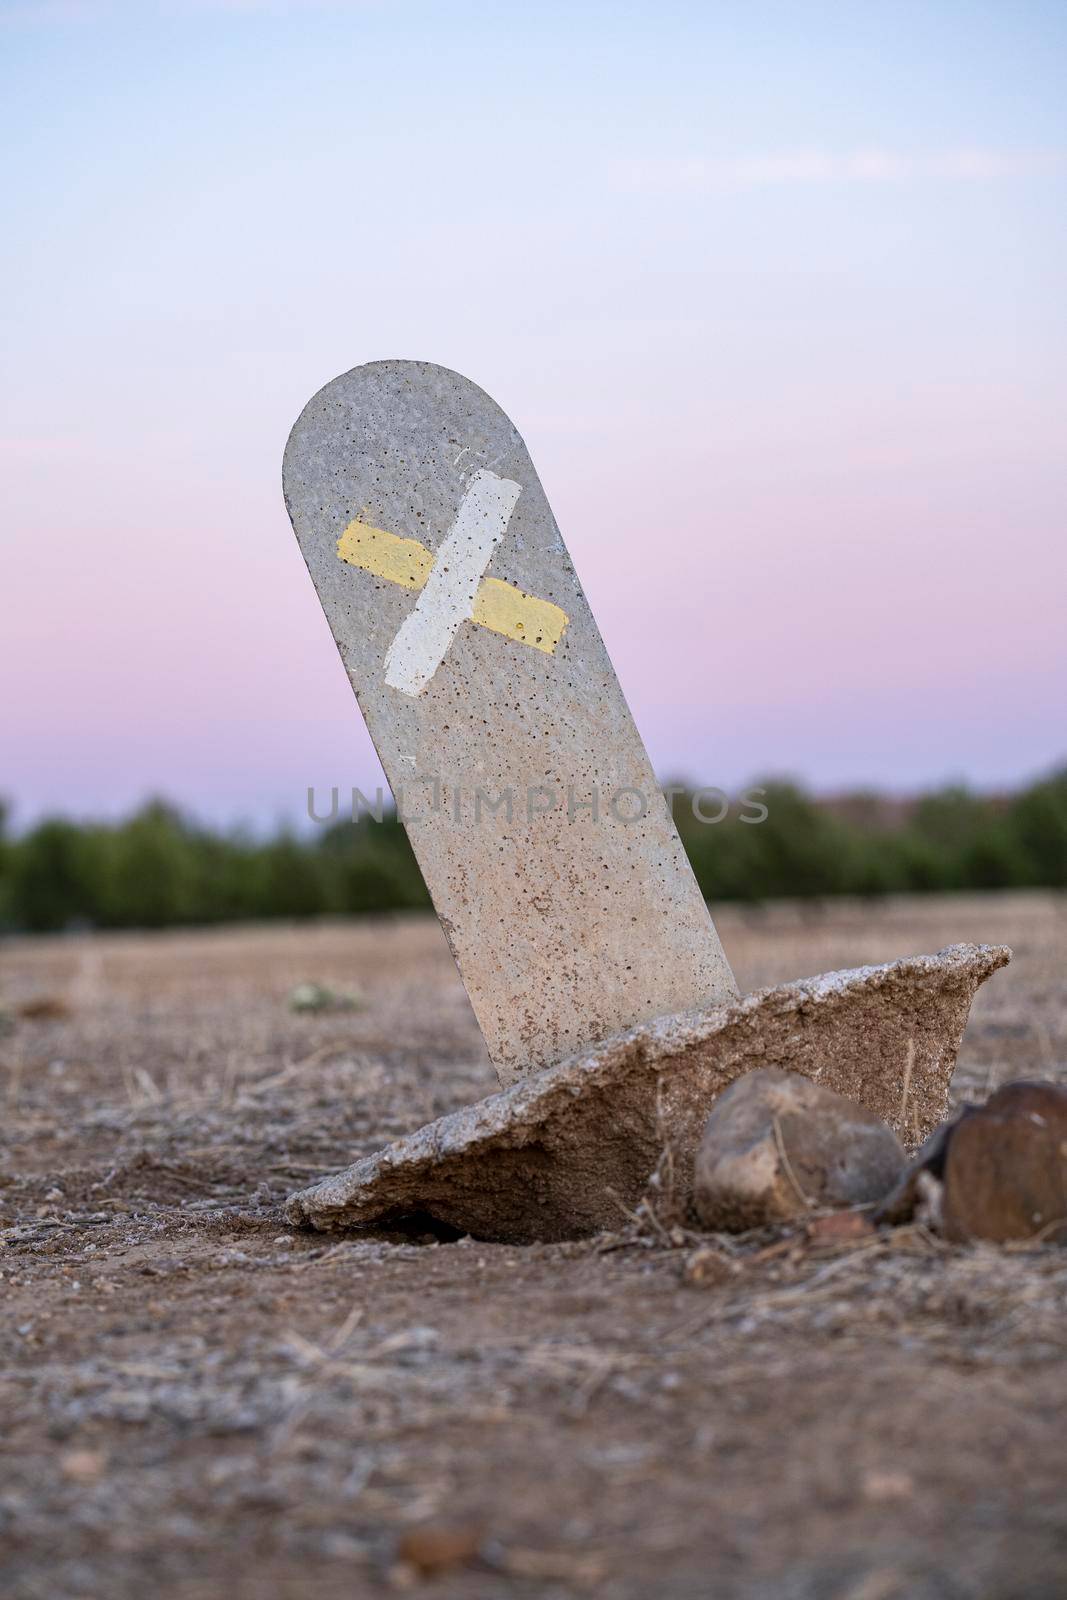 Typical signal trails, marked on a small stone post ripped from the ground in the countryside. Wrong way or direction. Colorful sunset sky in background